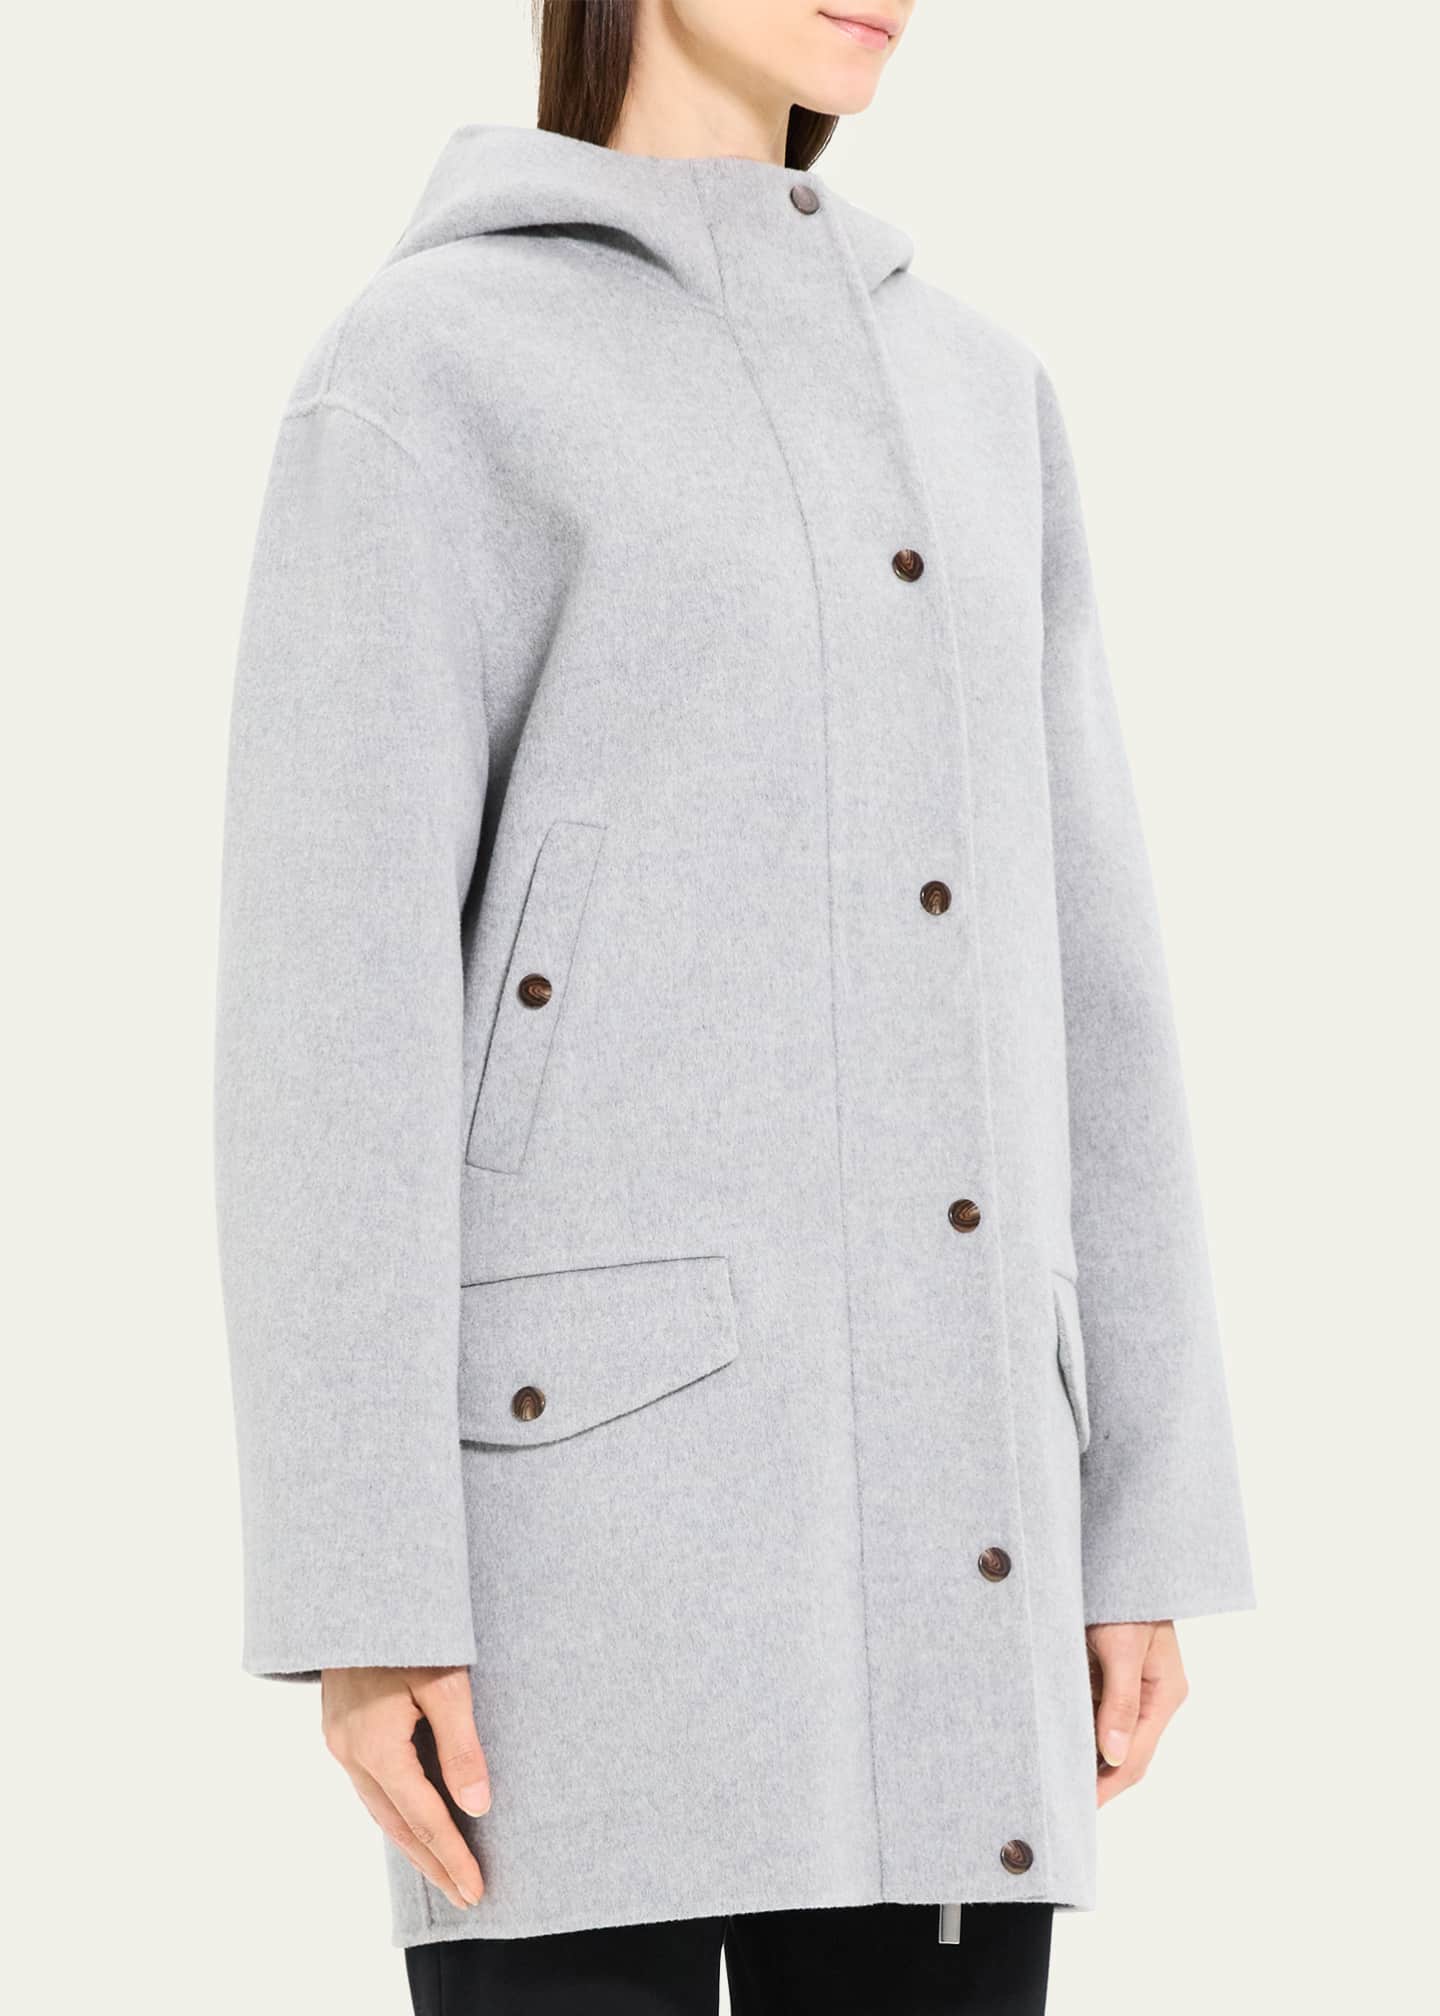 Theory New Divide Wool Cashmere Double-Face Hooded Parka - Bergdorf Goodman